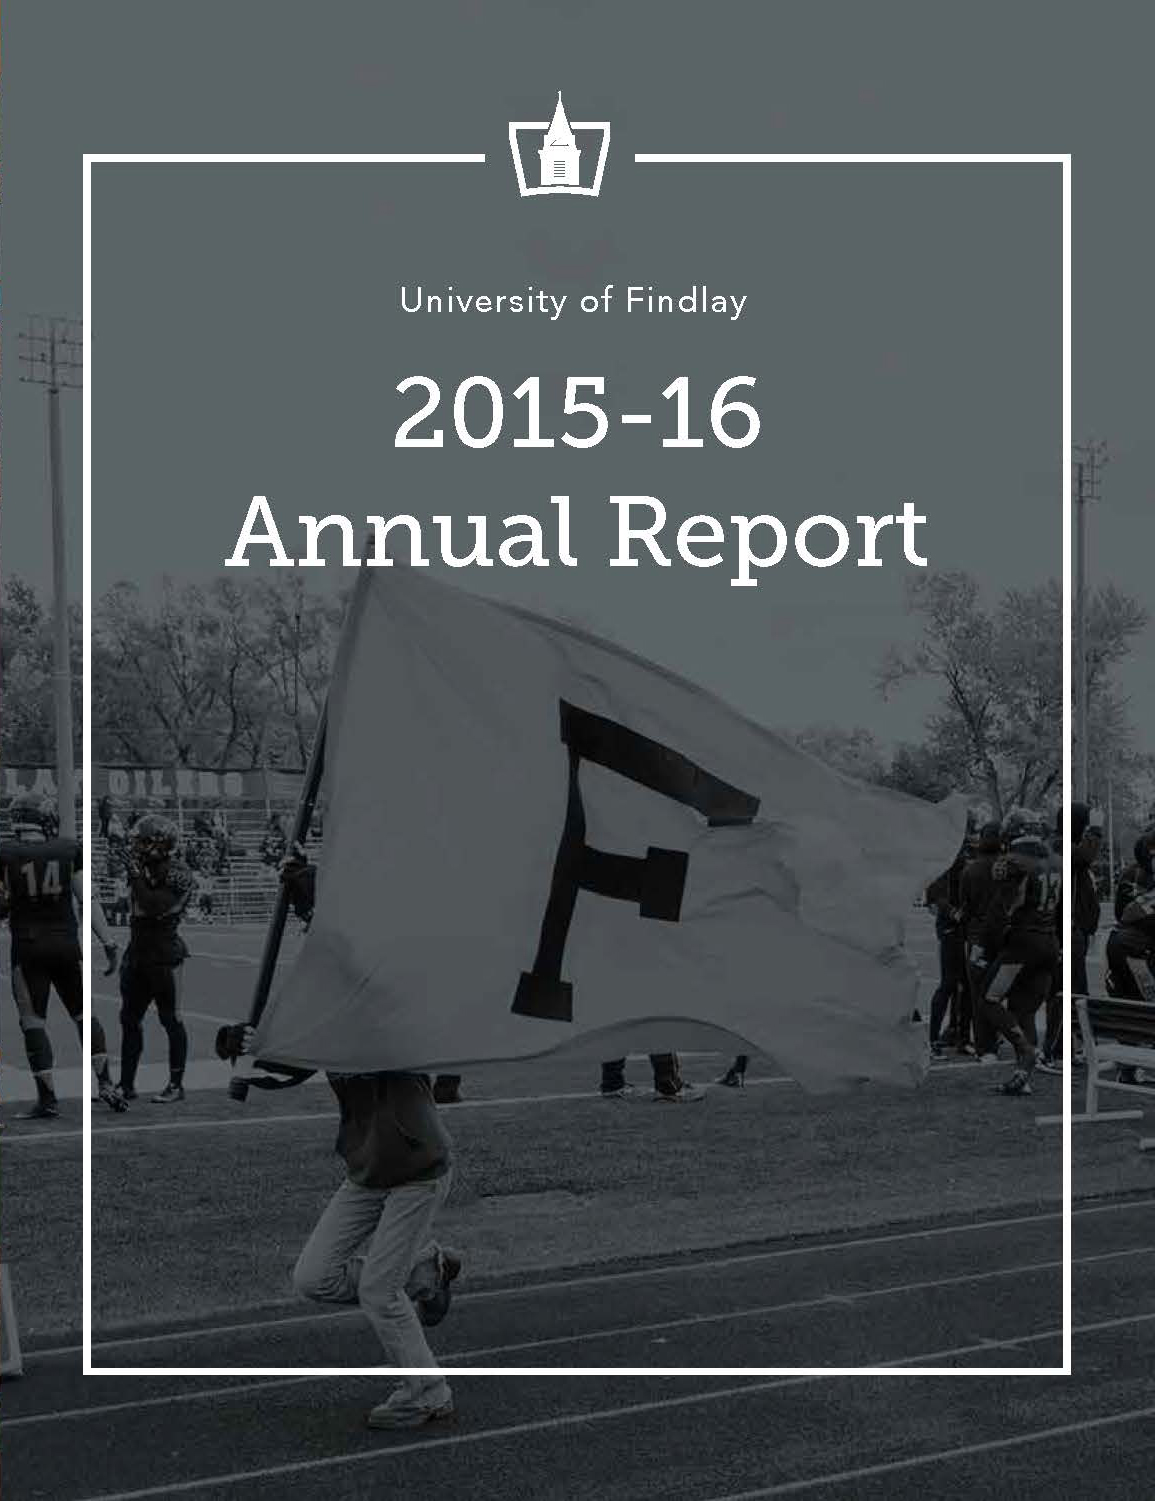 2016 Annual report download